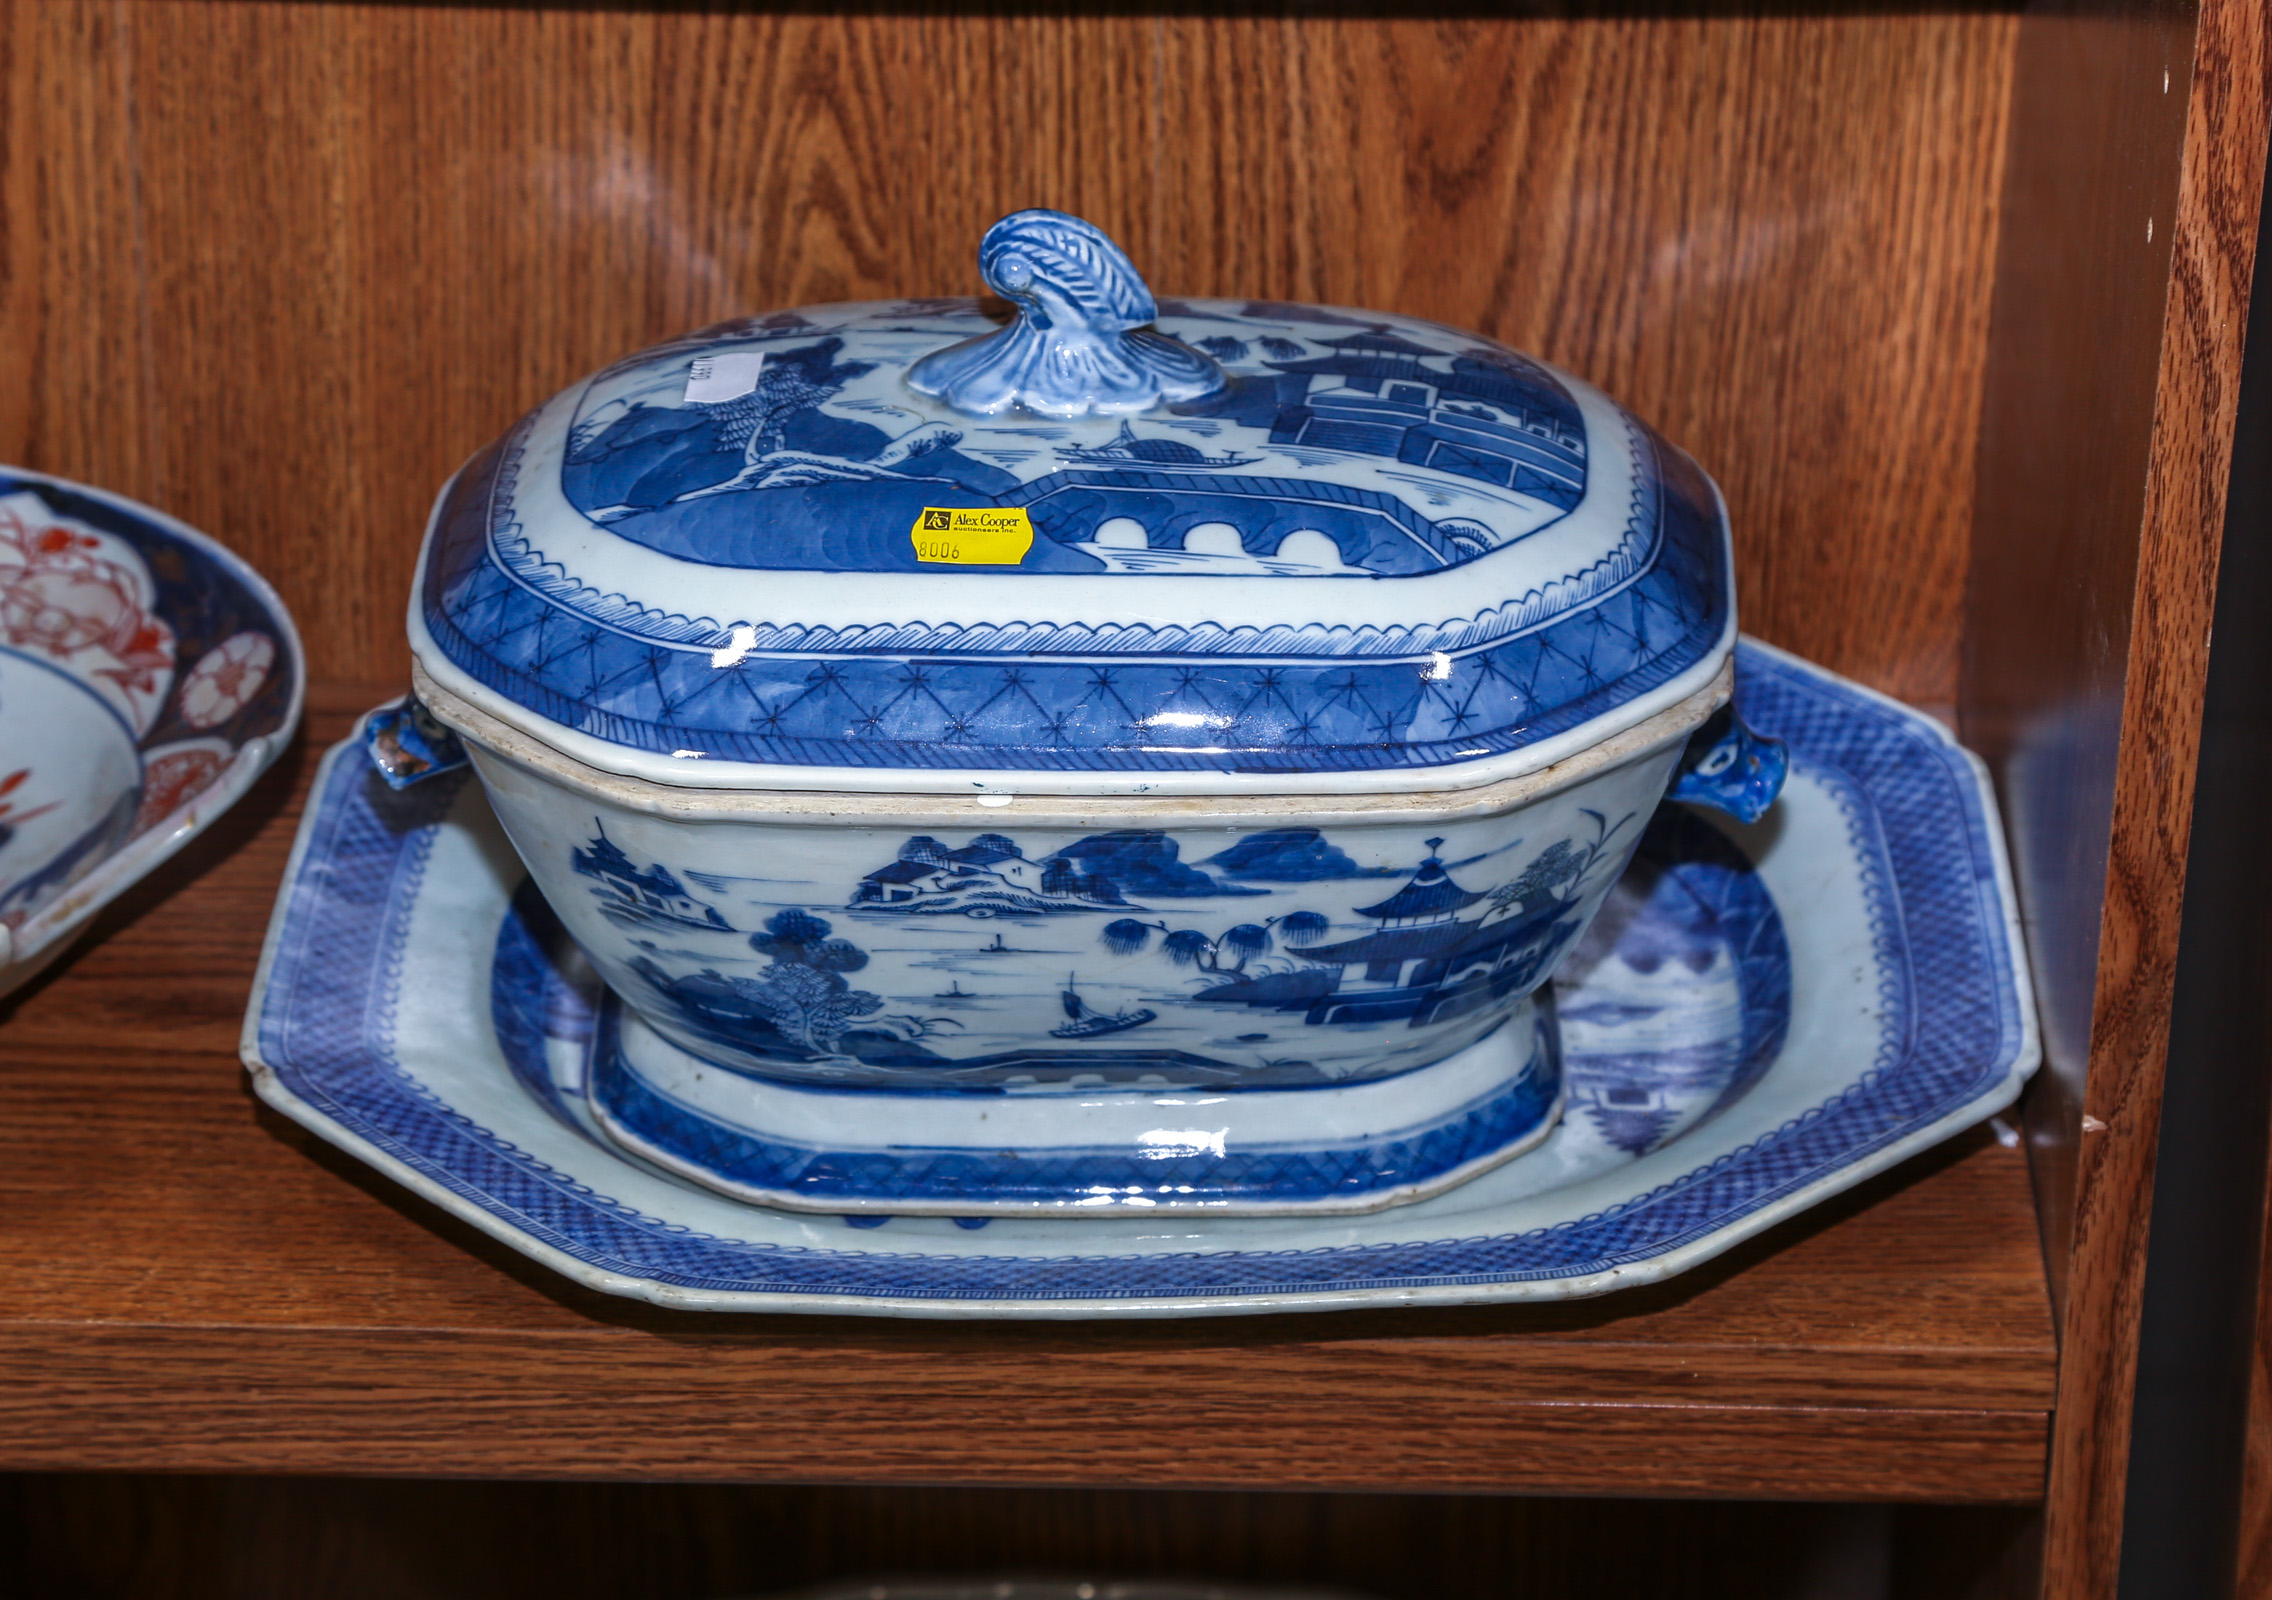 CHINESE EXPORT CANTON COVERED TUREEN 3cb1ee